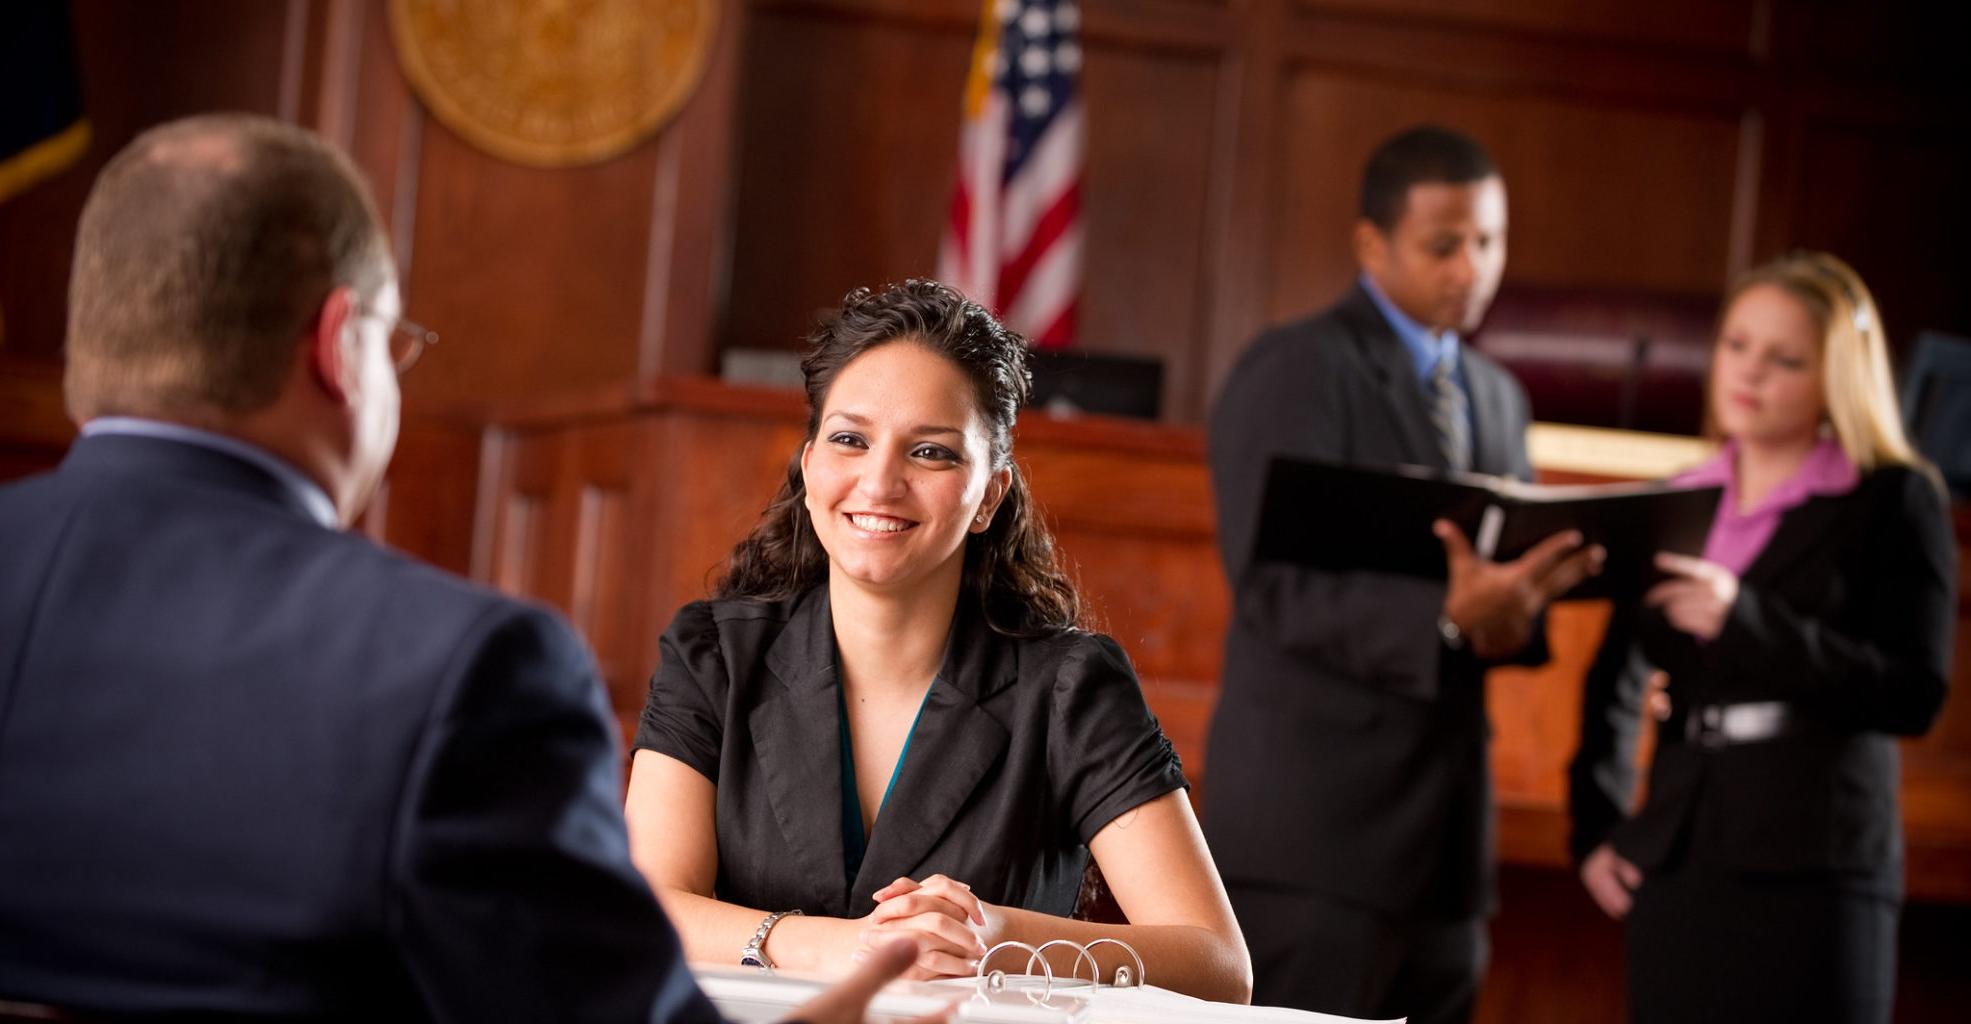 Woman approaching judges desk with individual discussing a case in the background.